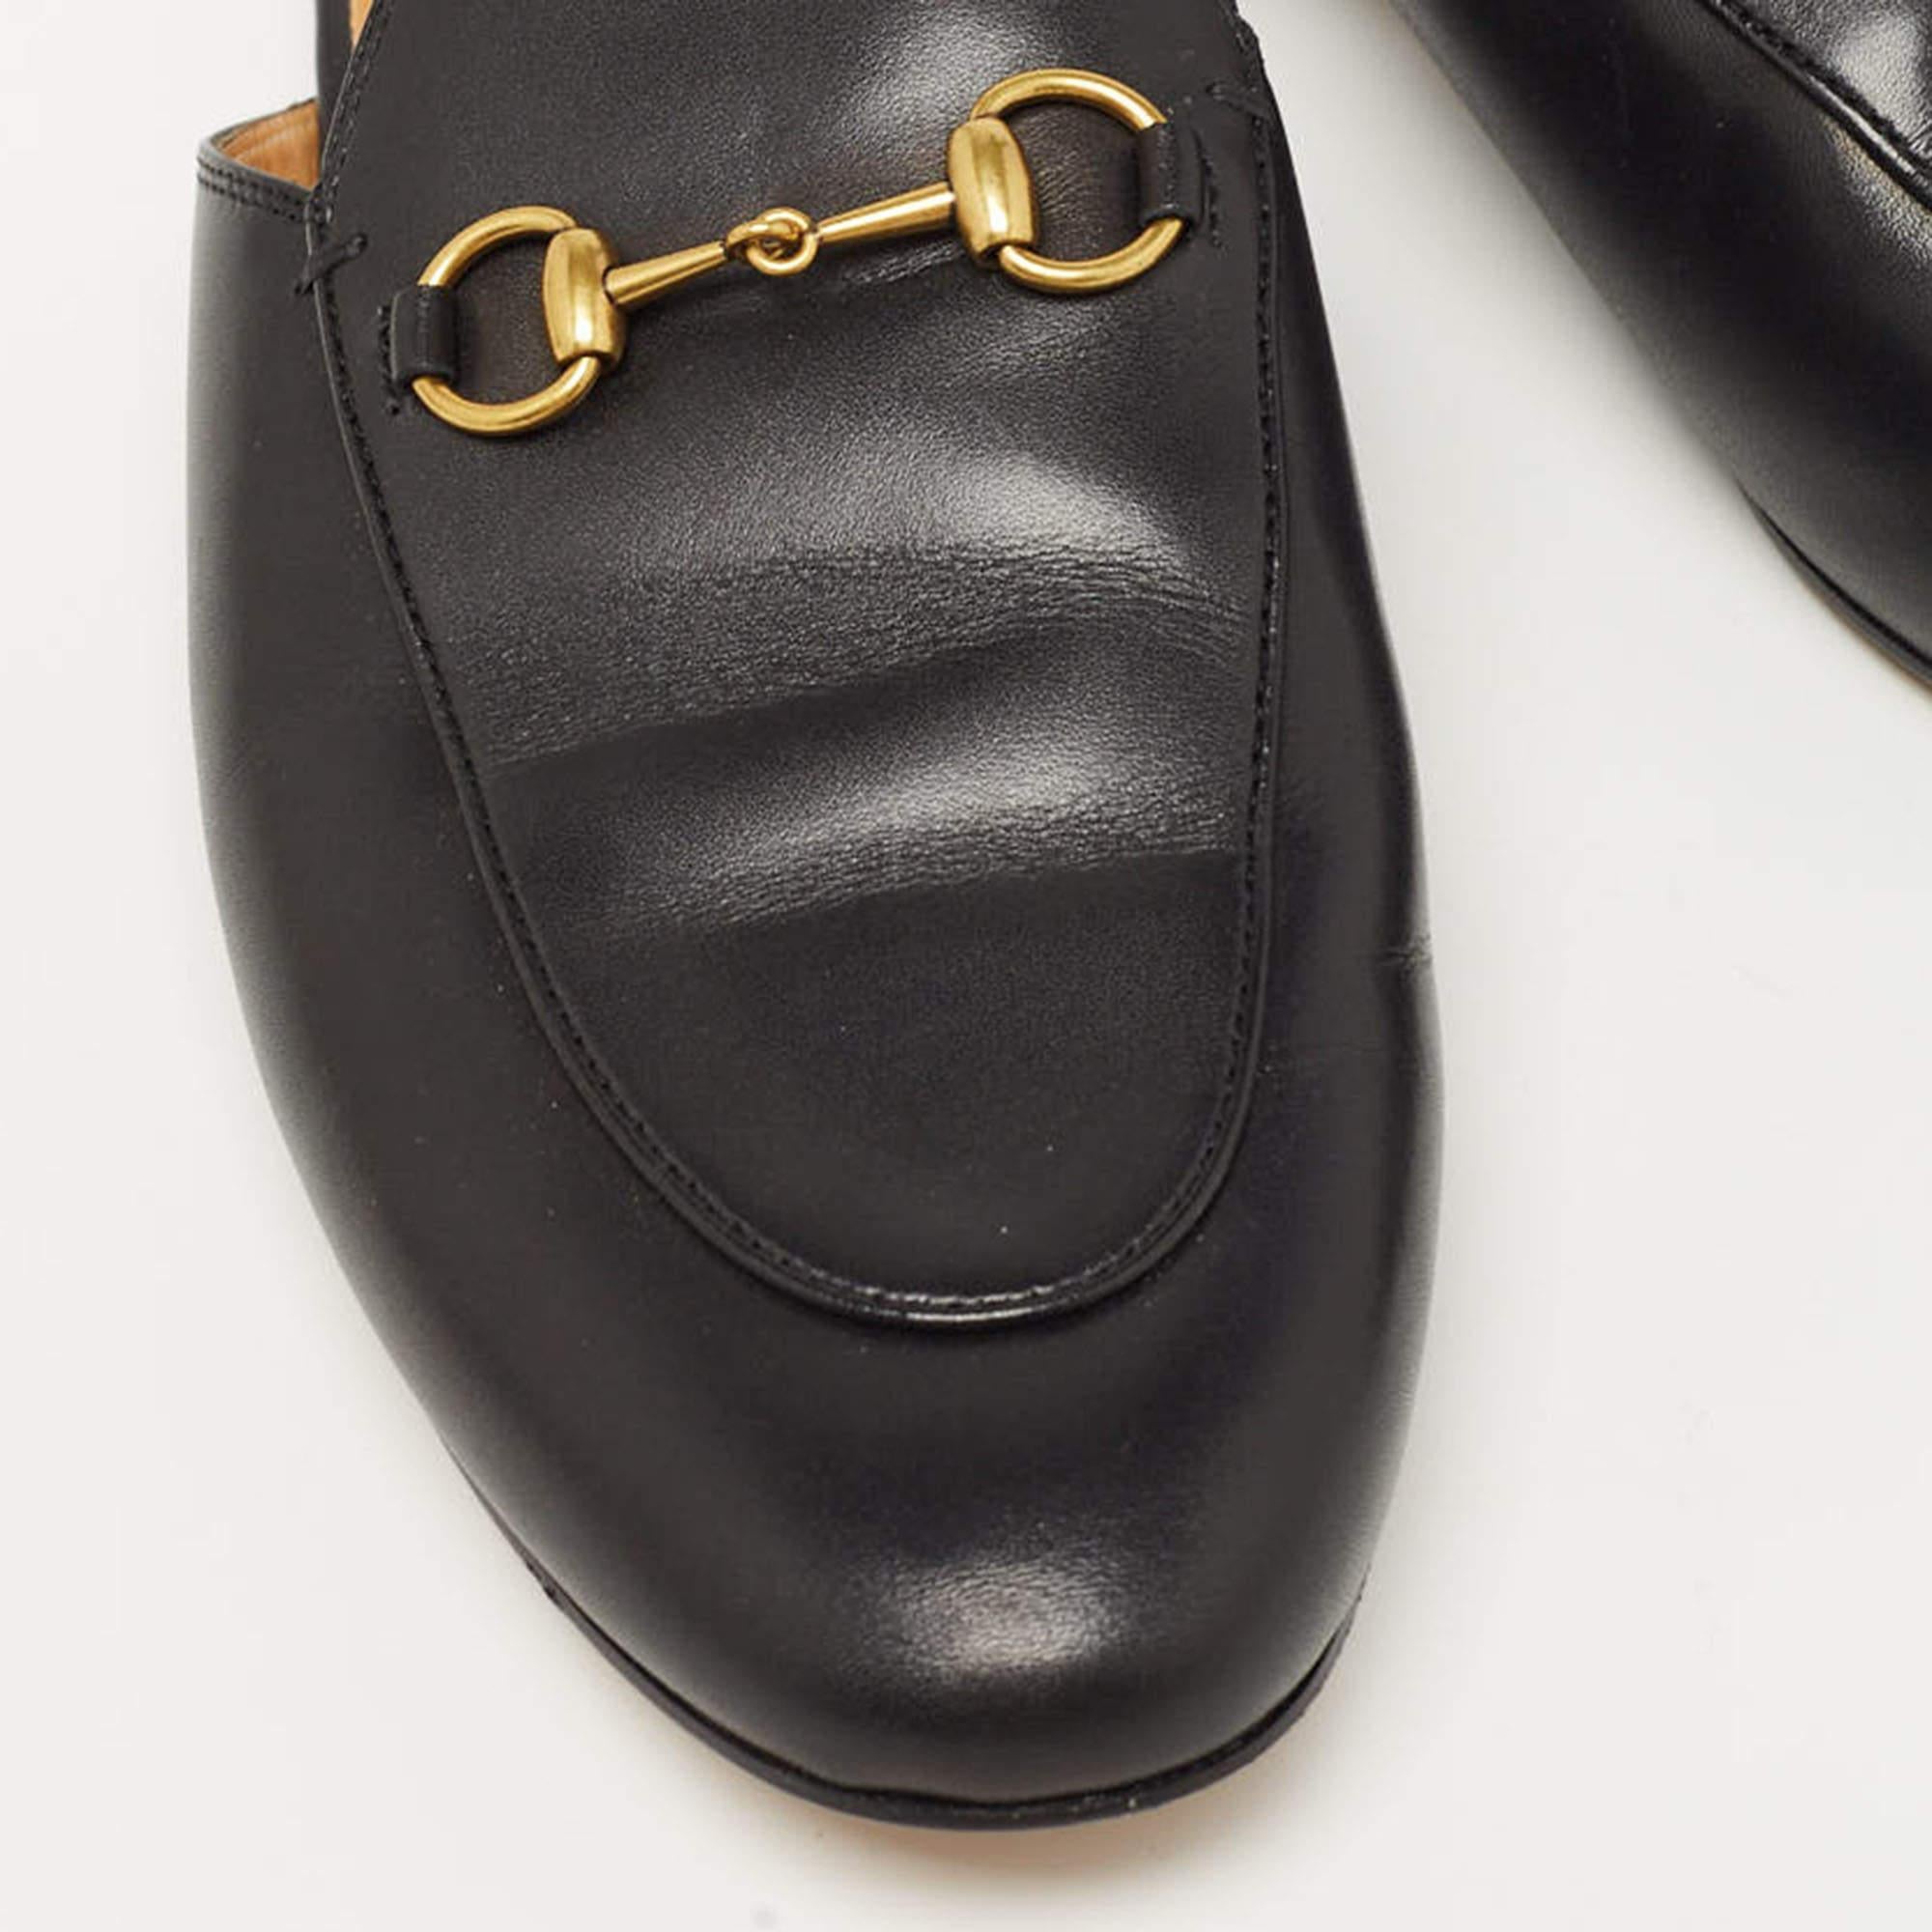 Gucci Black Leather Princetown Flat Mules Size 40 1